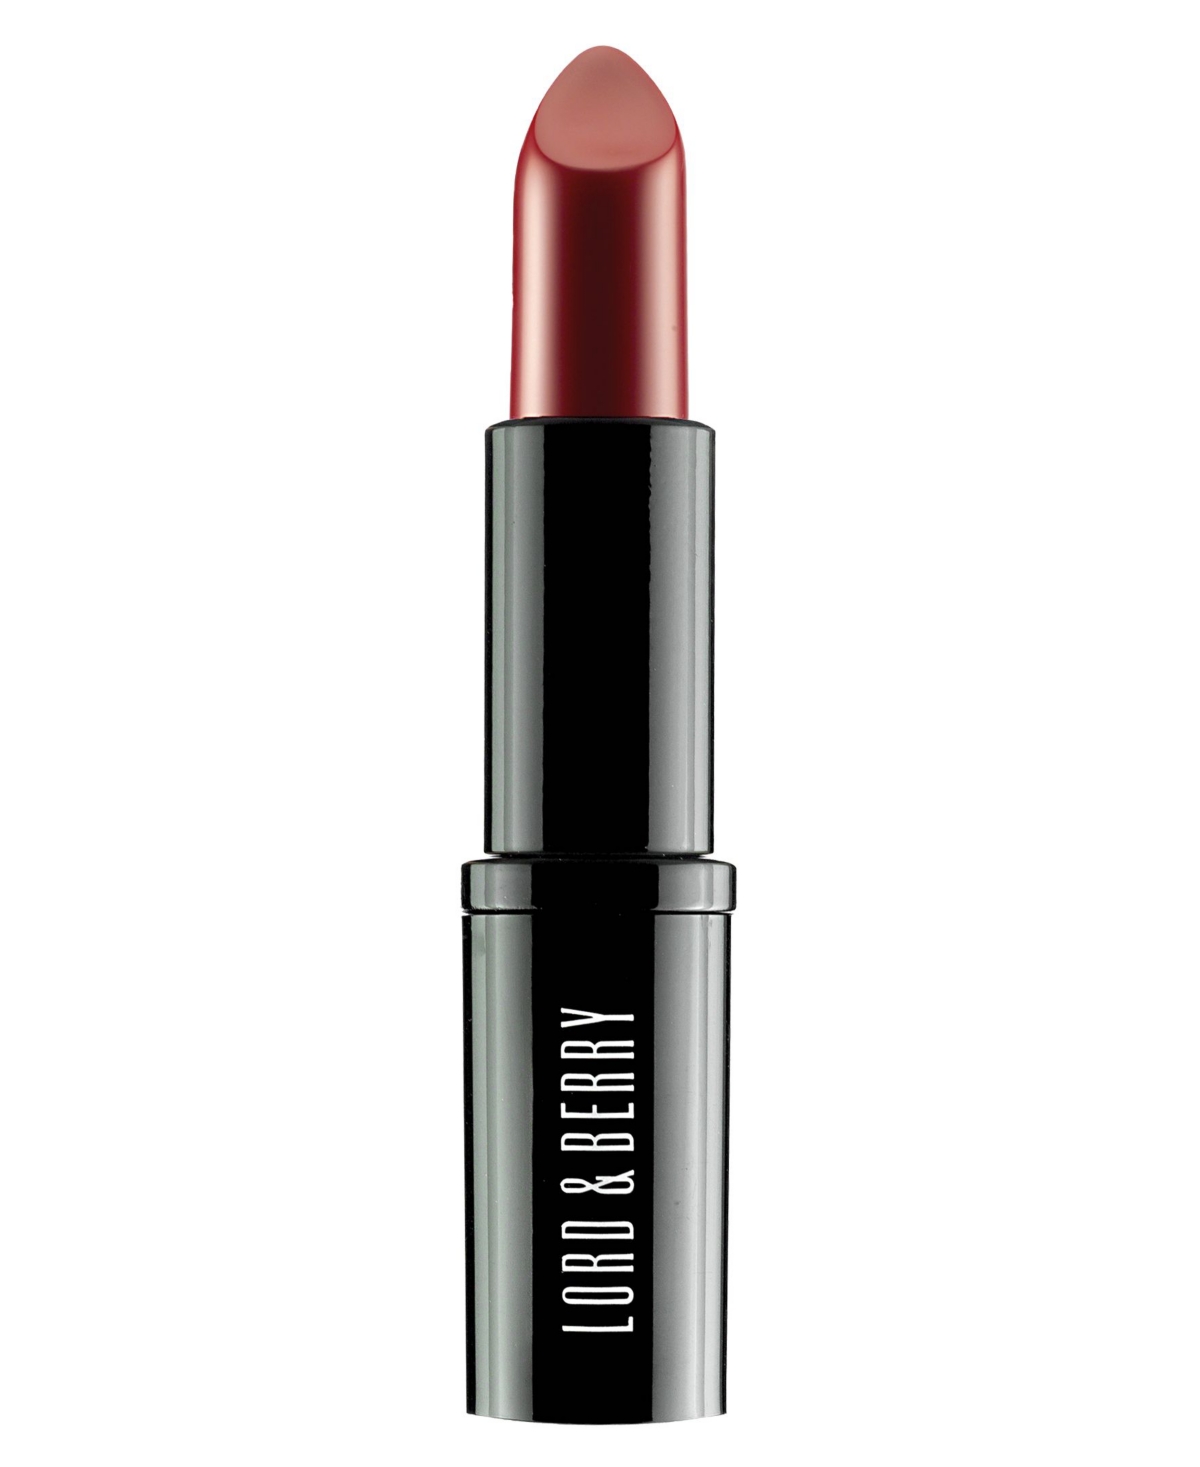 Lord & Berry Vogue Matte Lipstick In Red Carpet - Starlet Red